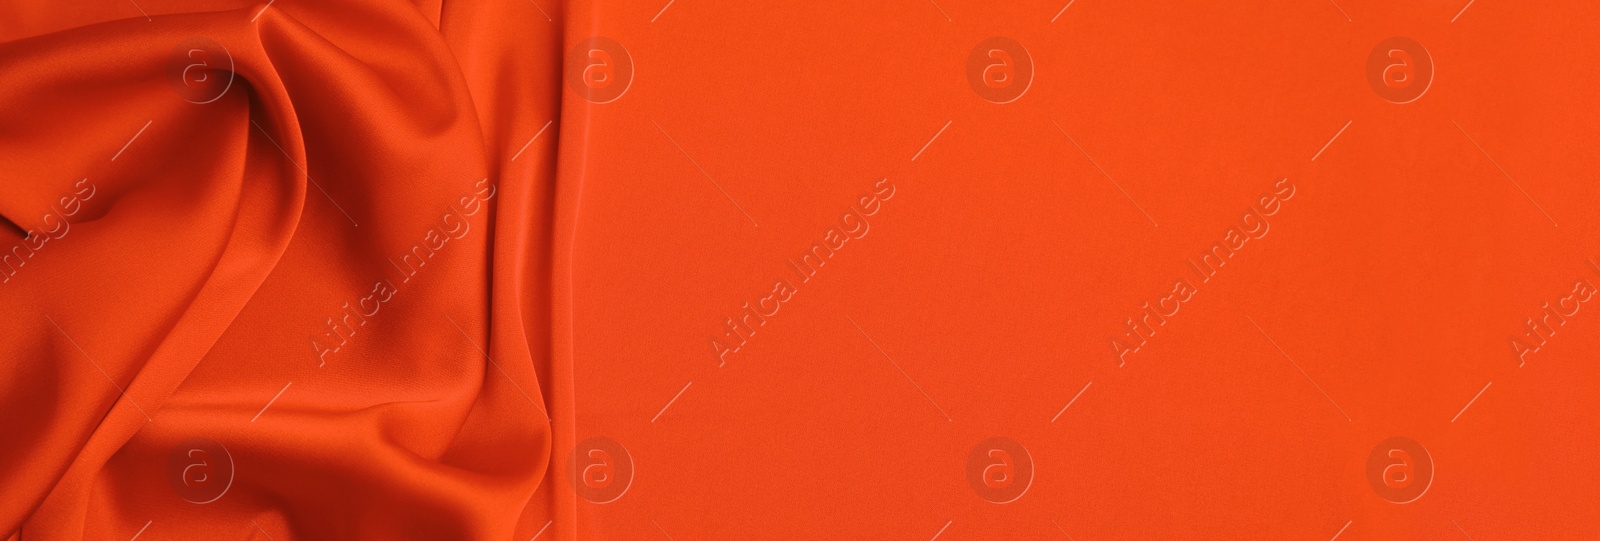 Image of Orange silk fabric as background, top view with space for text. Banner design